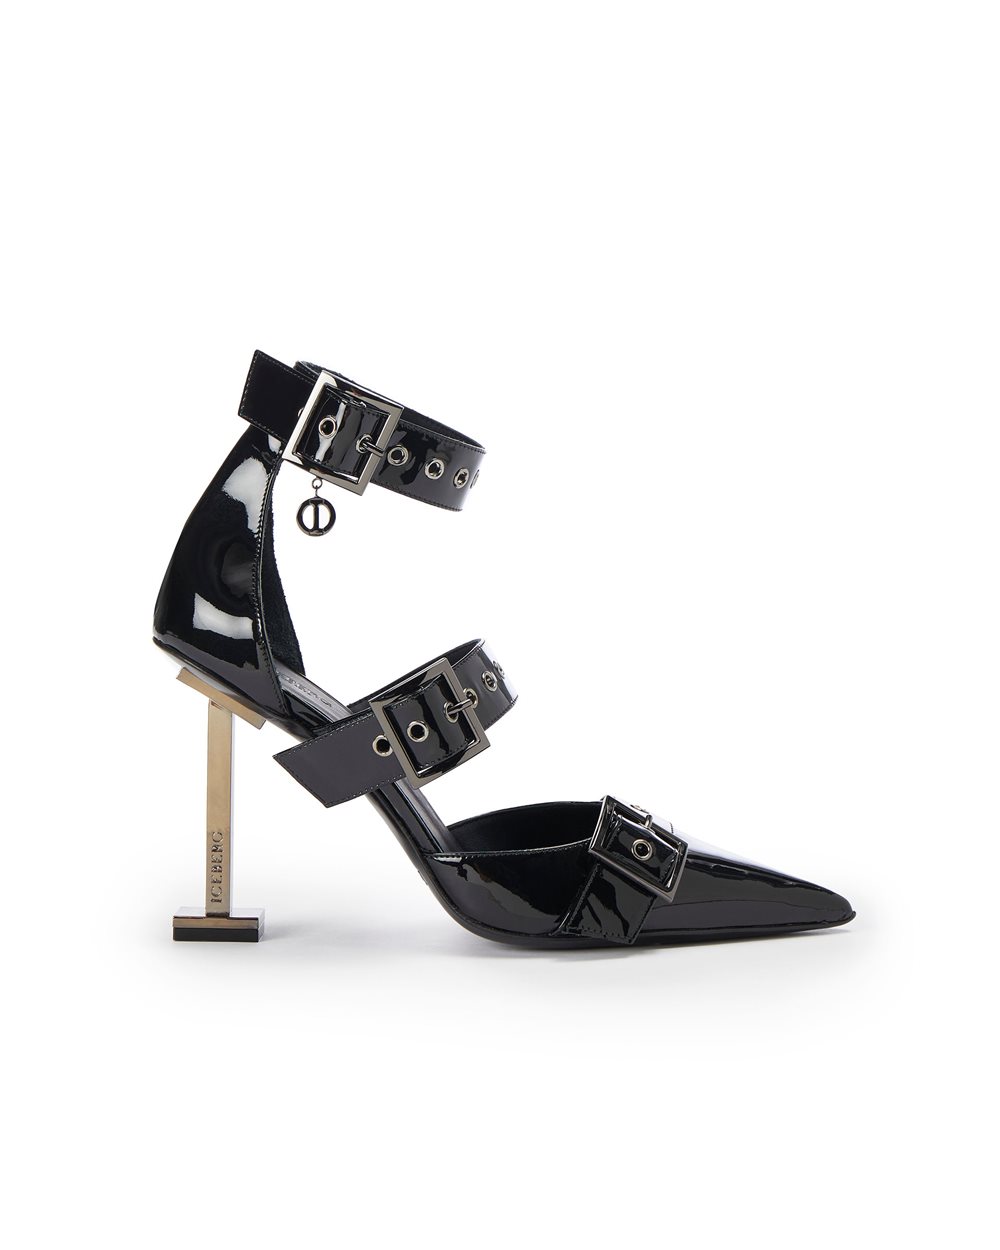 Black pumps with iconic heel - Shoes & sneakers | Iceberg - Official Website